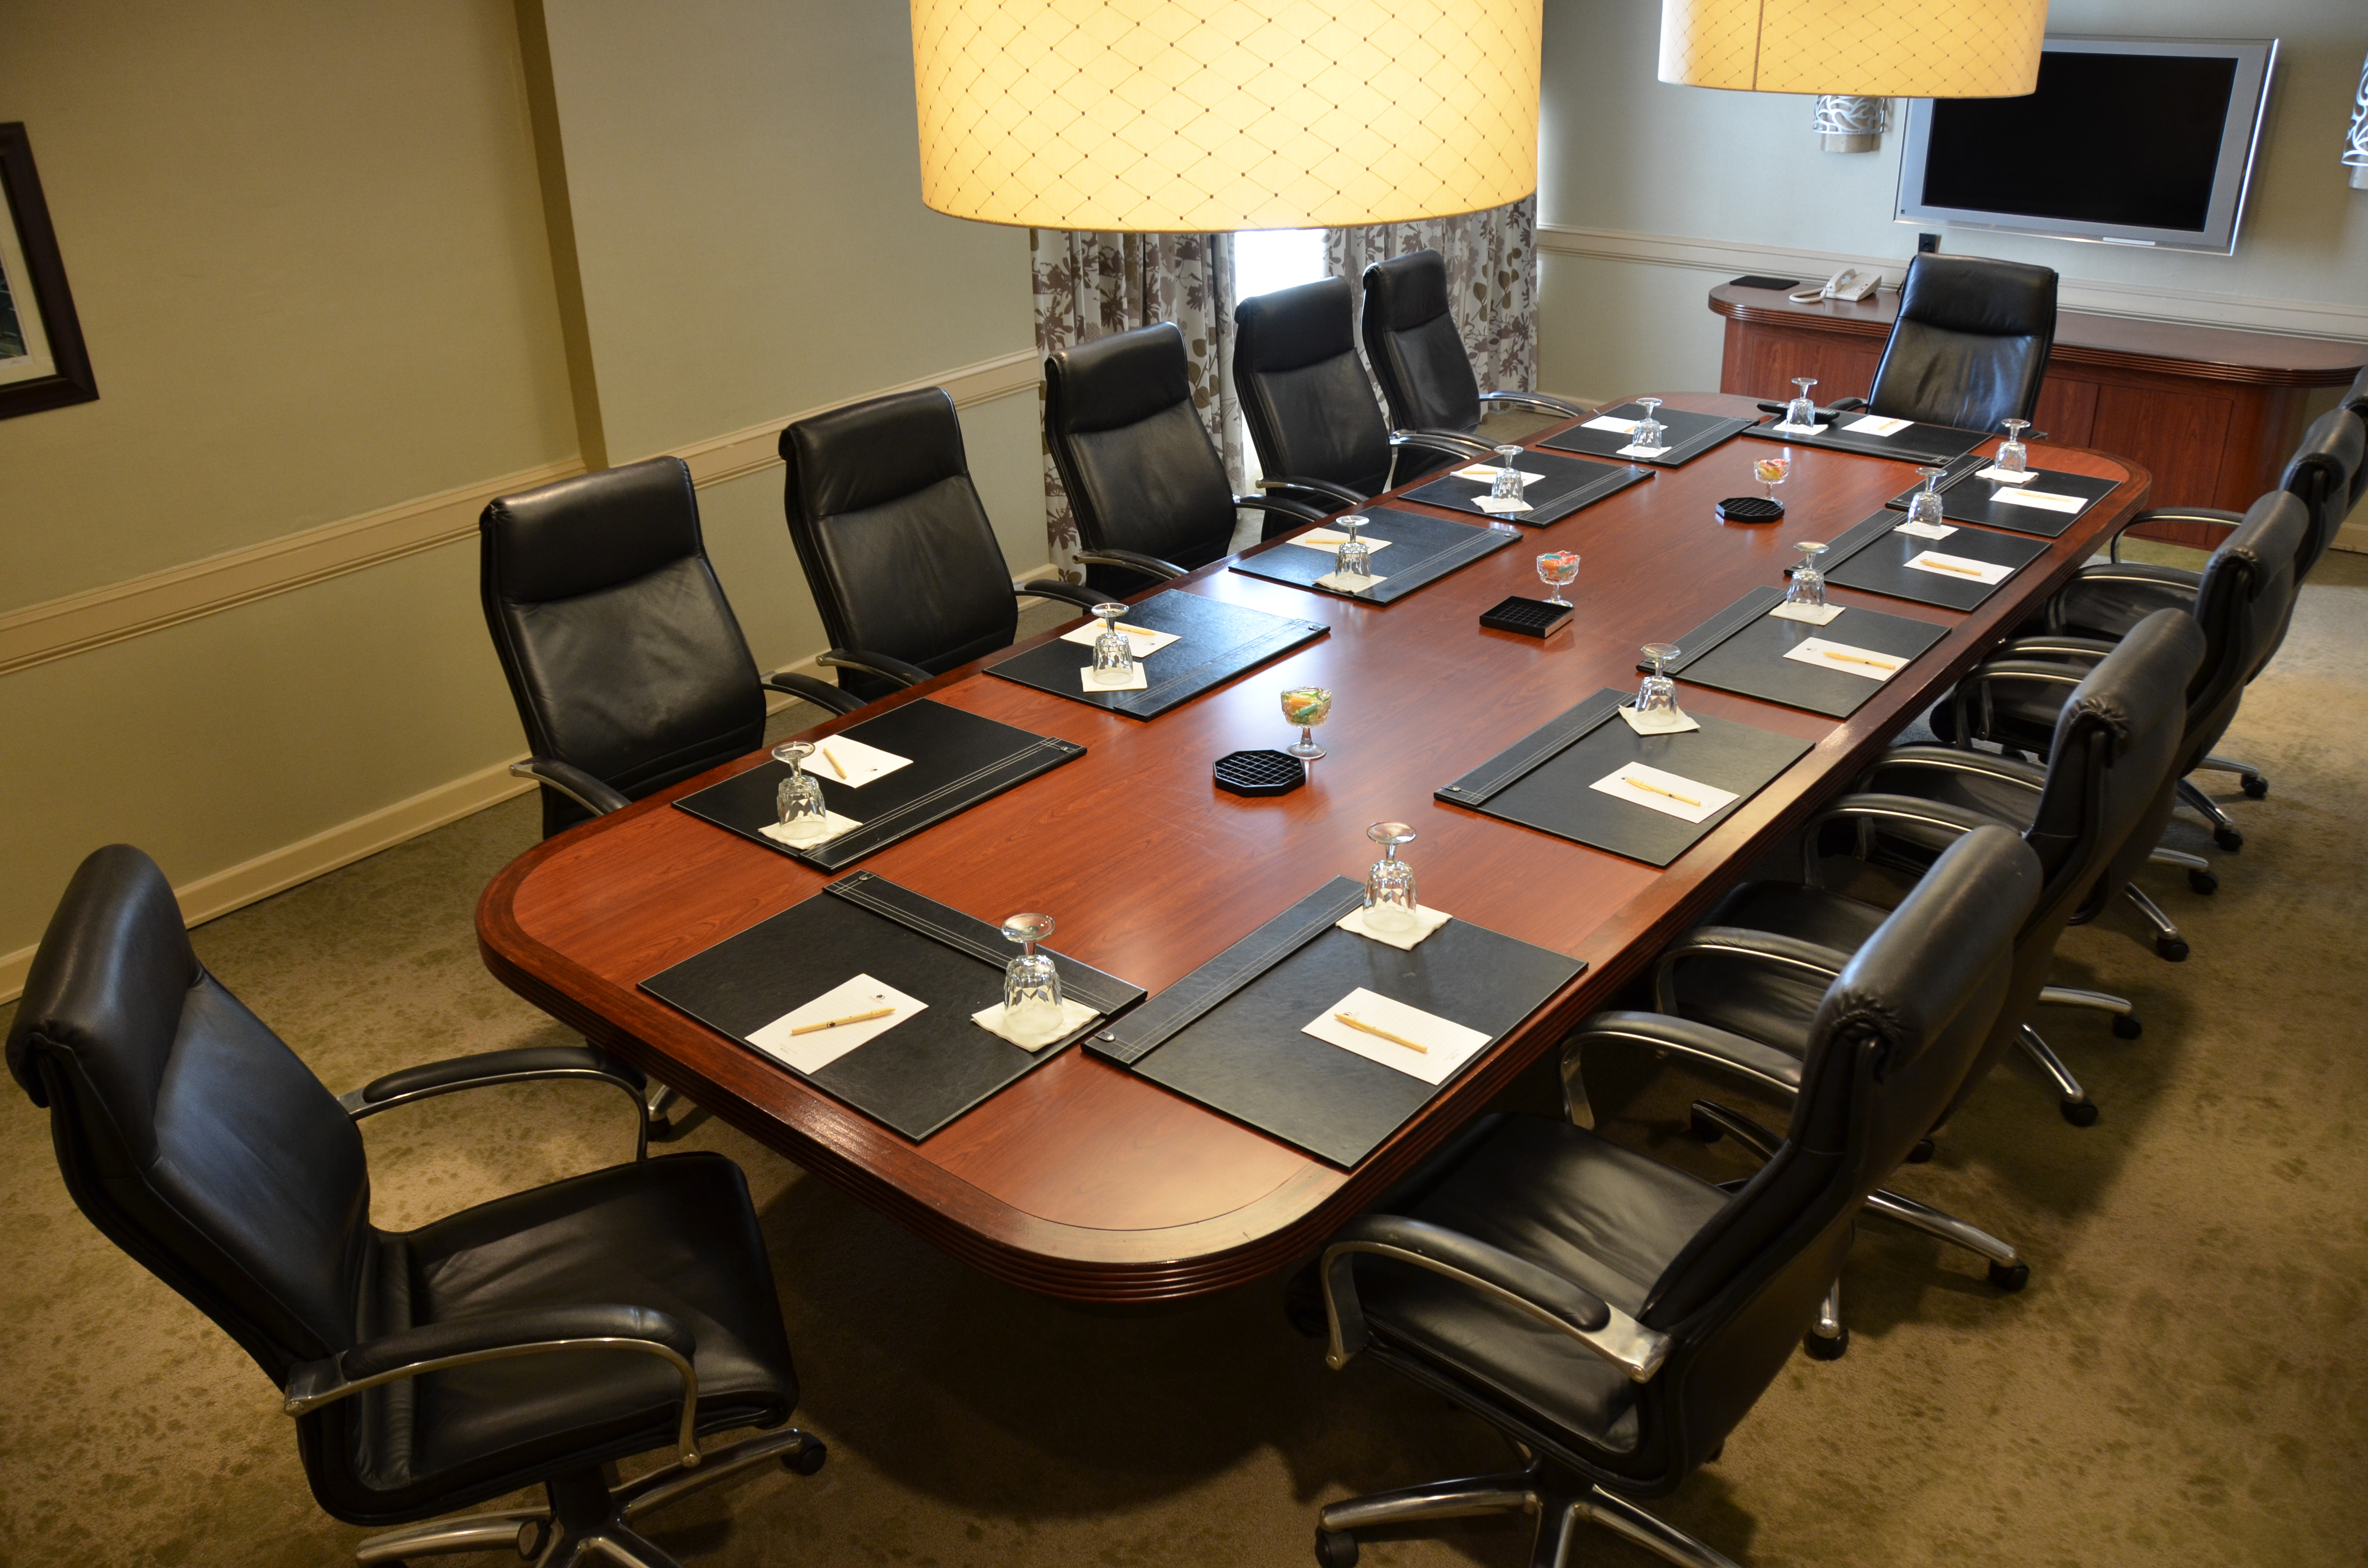 Drinking Glasses, Notepads, and Seating for 12 at Boardroom Table, Wall Art, Window With Open Drapes, and TV